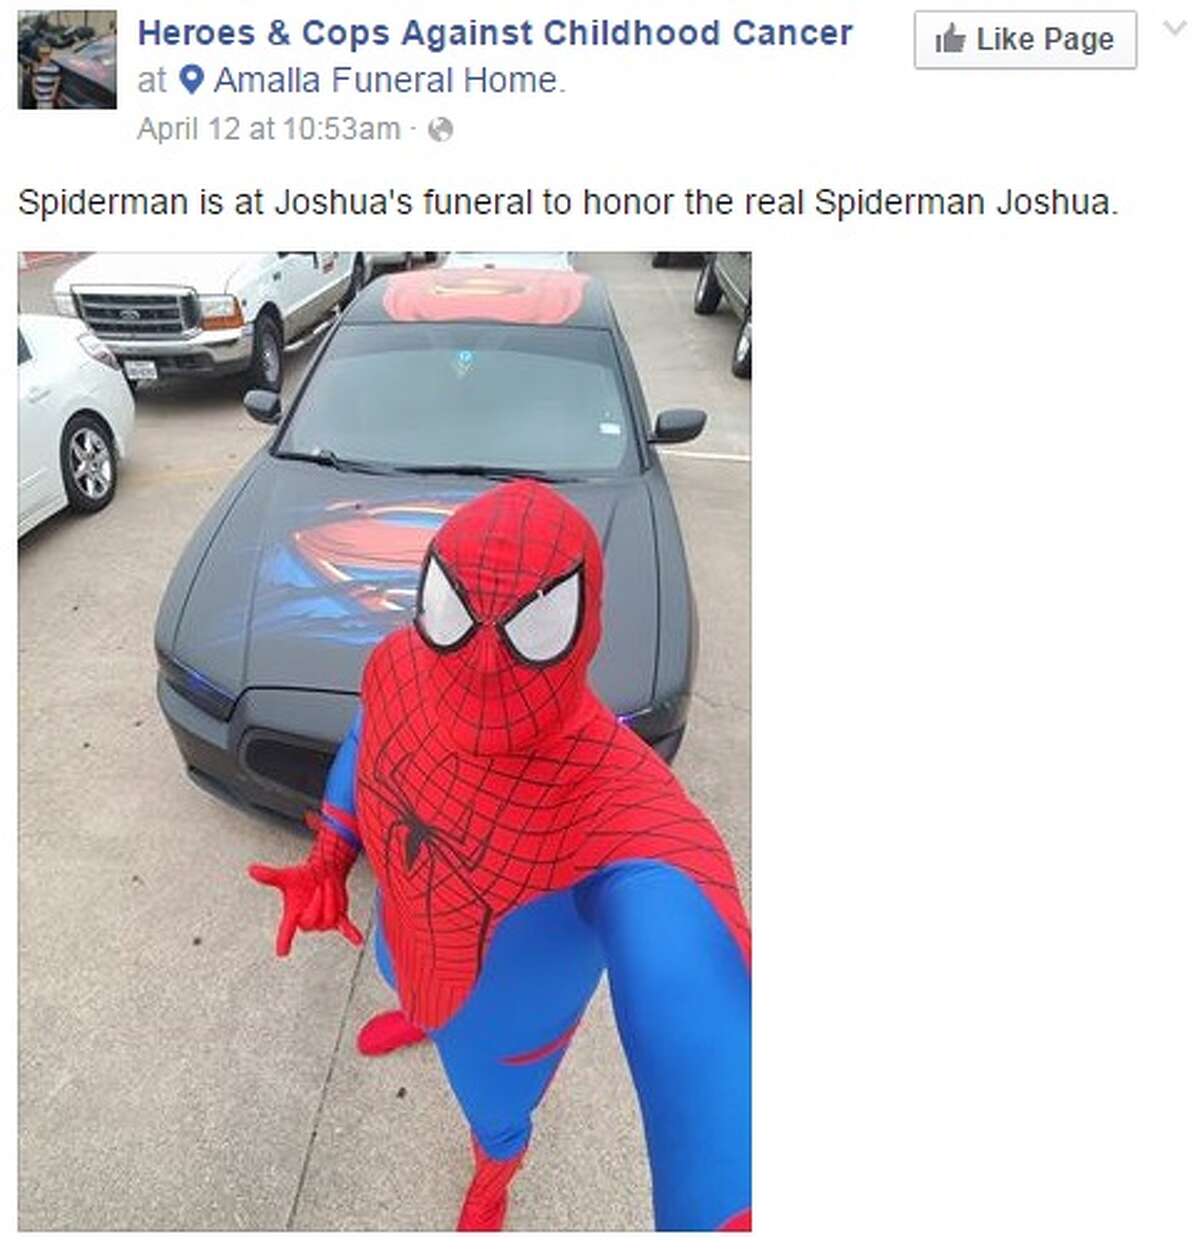 FWPD office Damon Cole at Joshua Garcia's funeral, dressed as Spider-Man, the child's favorite superhero.